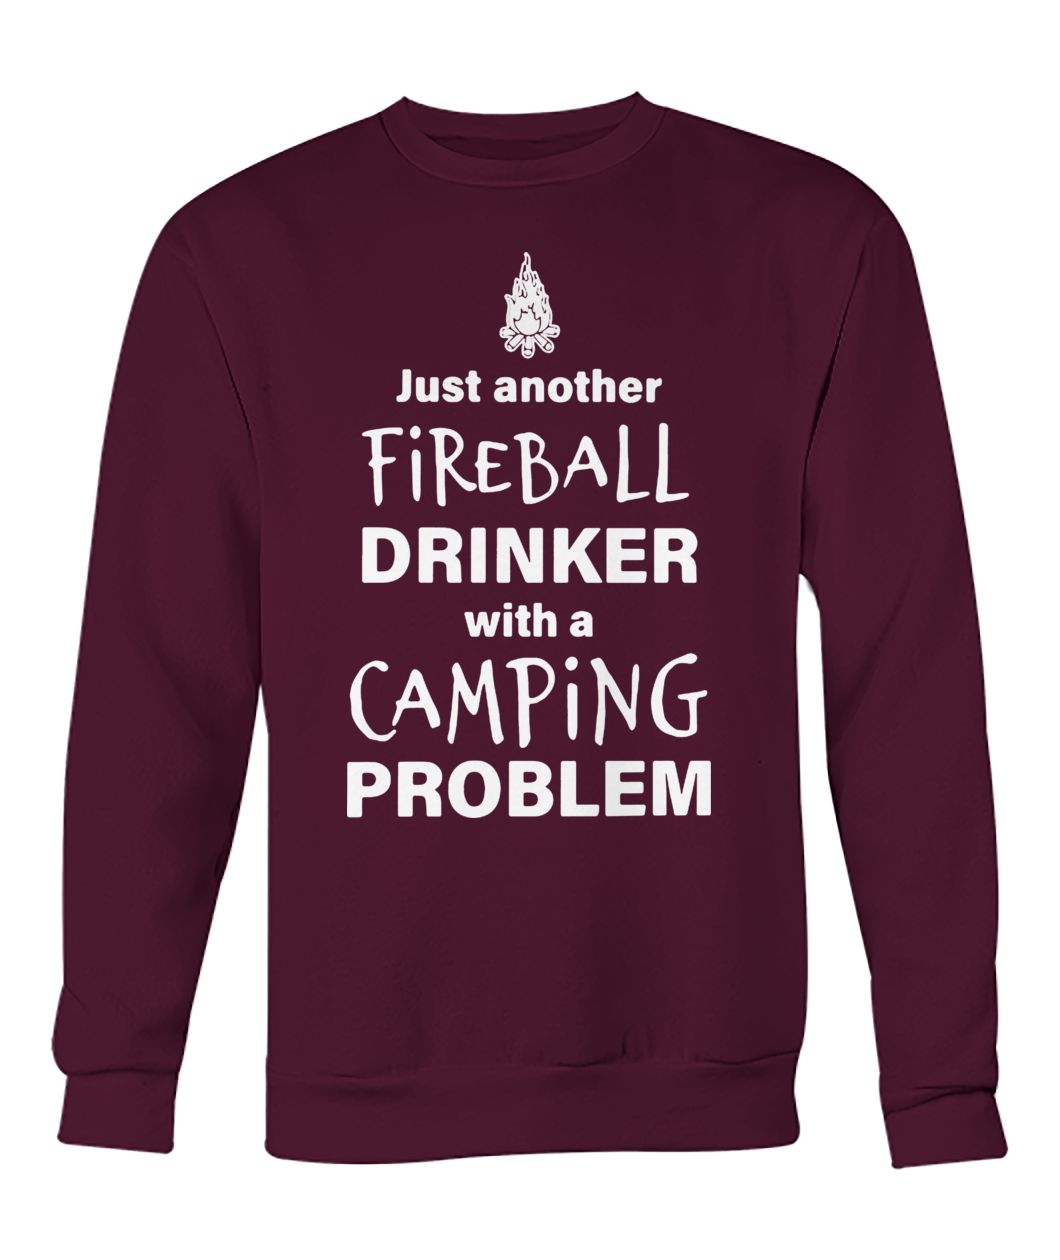 Just another fireball drinker with a camping problem crew neck sweatshirt